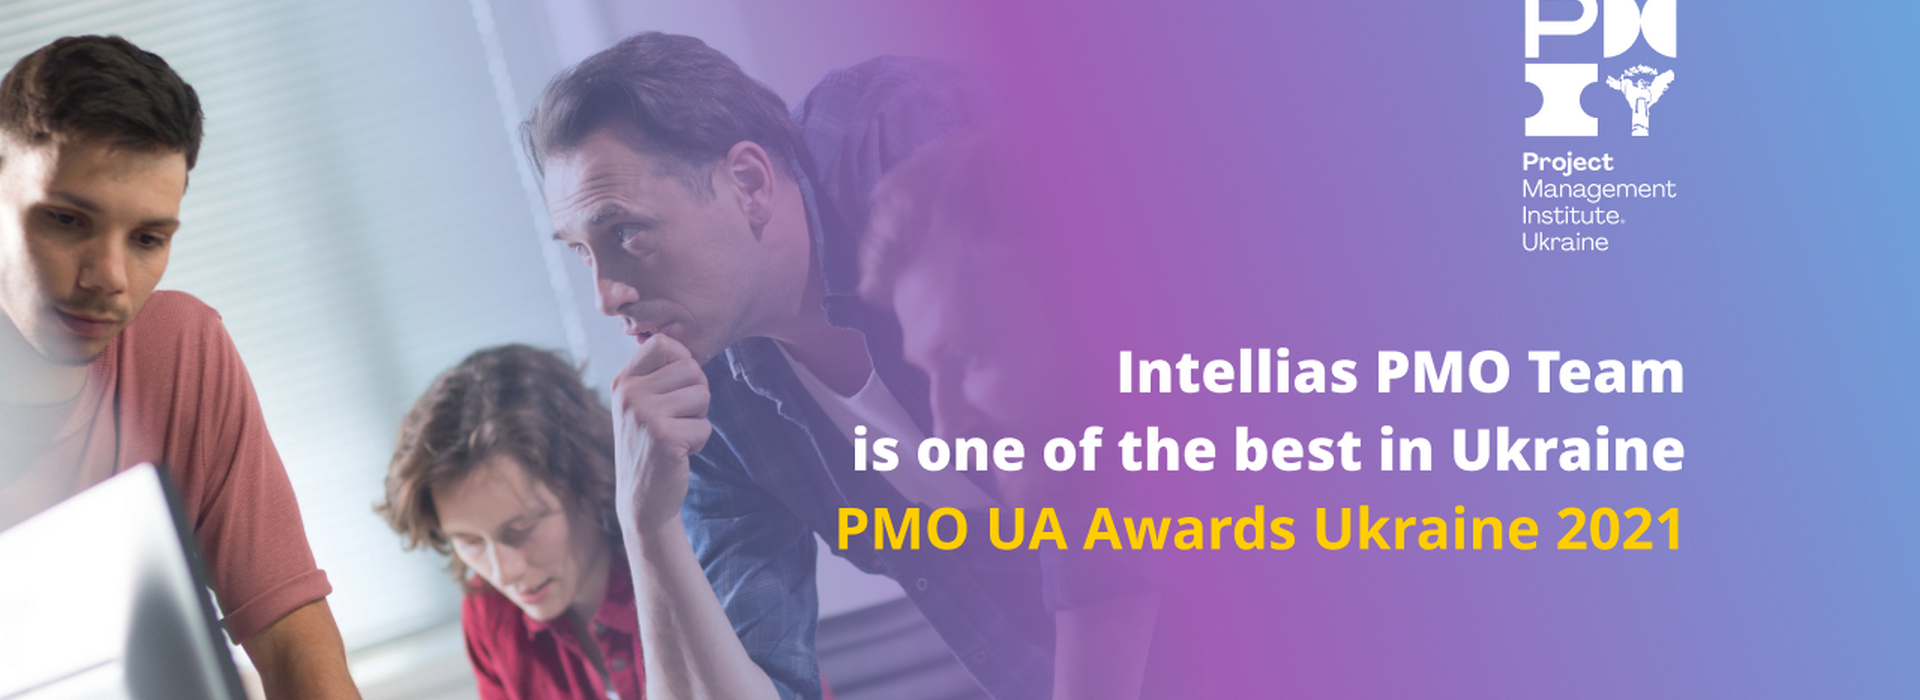 Intellias Project Management Office Named Among the Best According to PMO Global Alliance